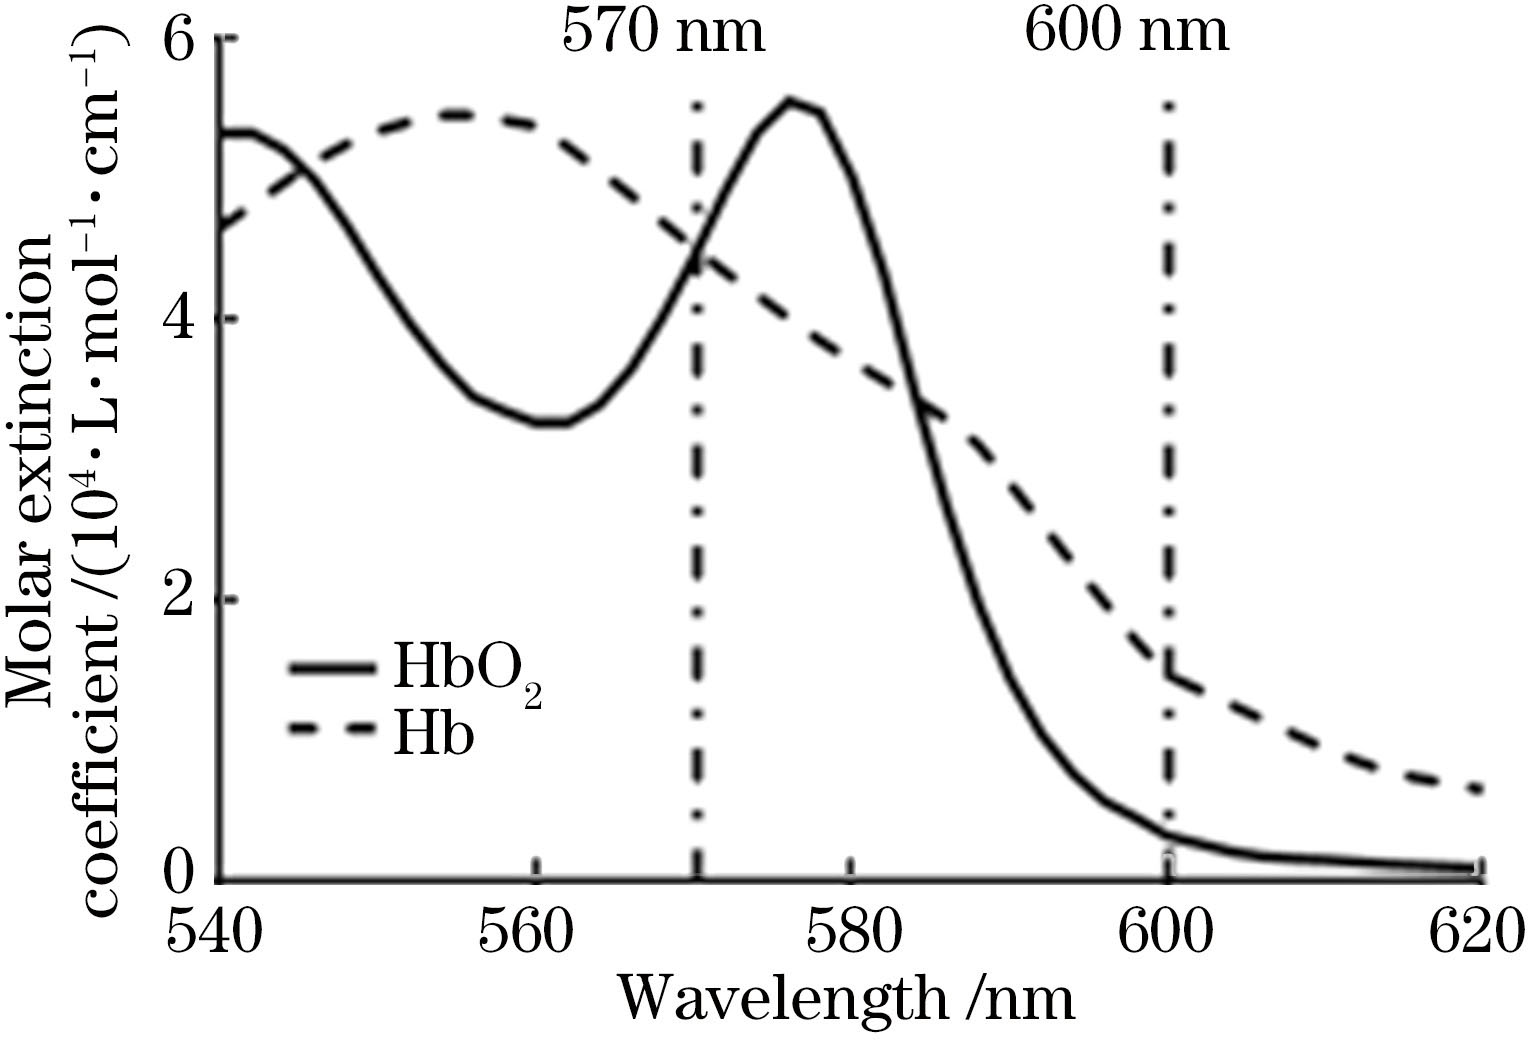 Extinction coefficient of HbO2 and Hb at different wavelengths